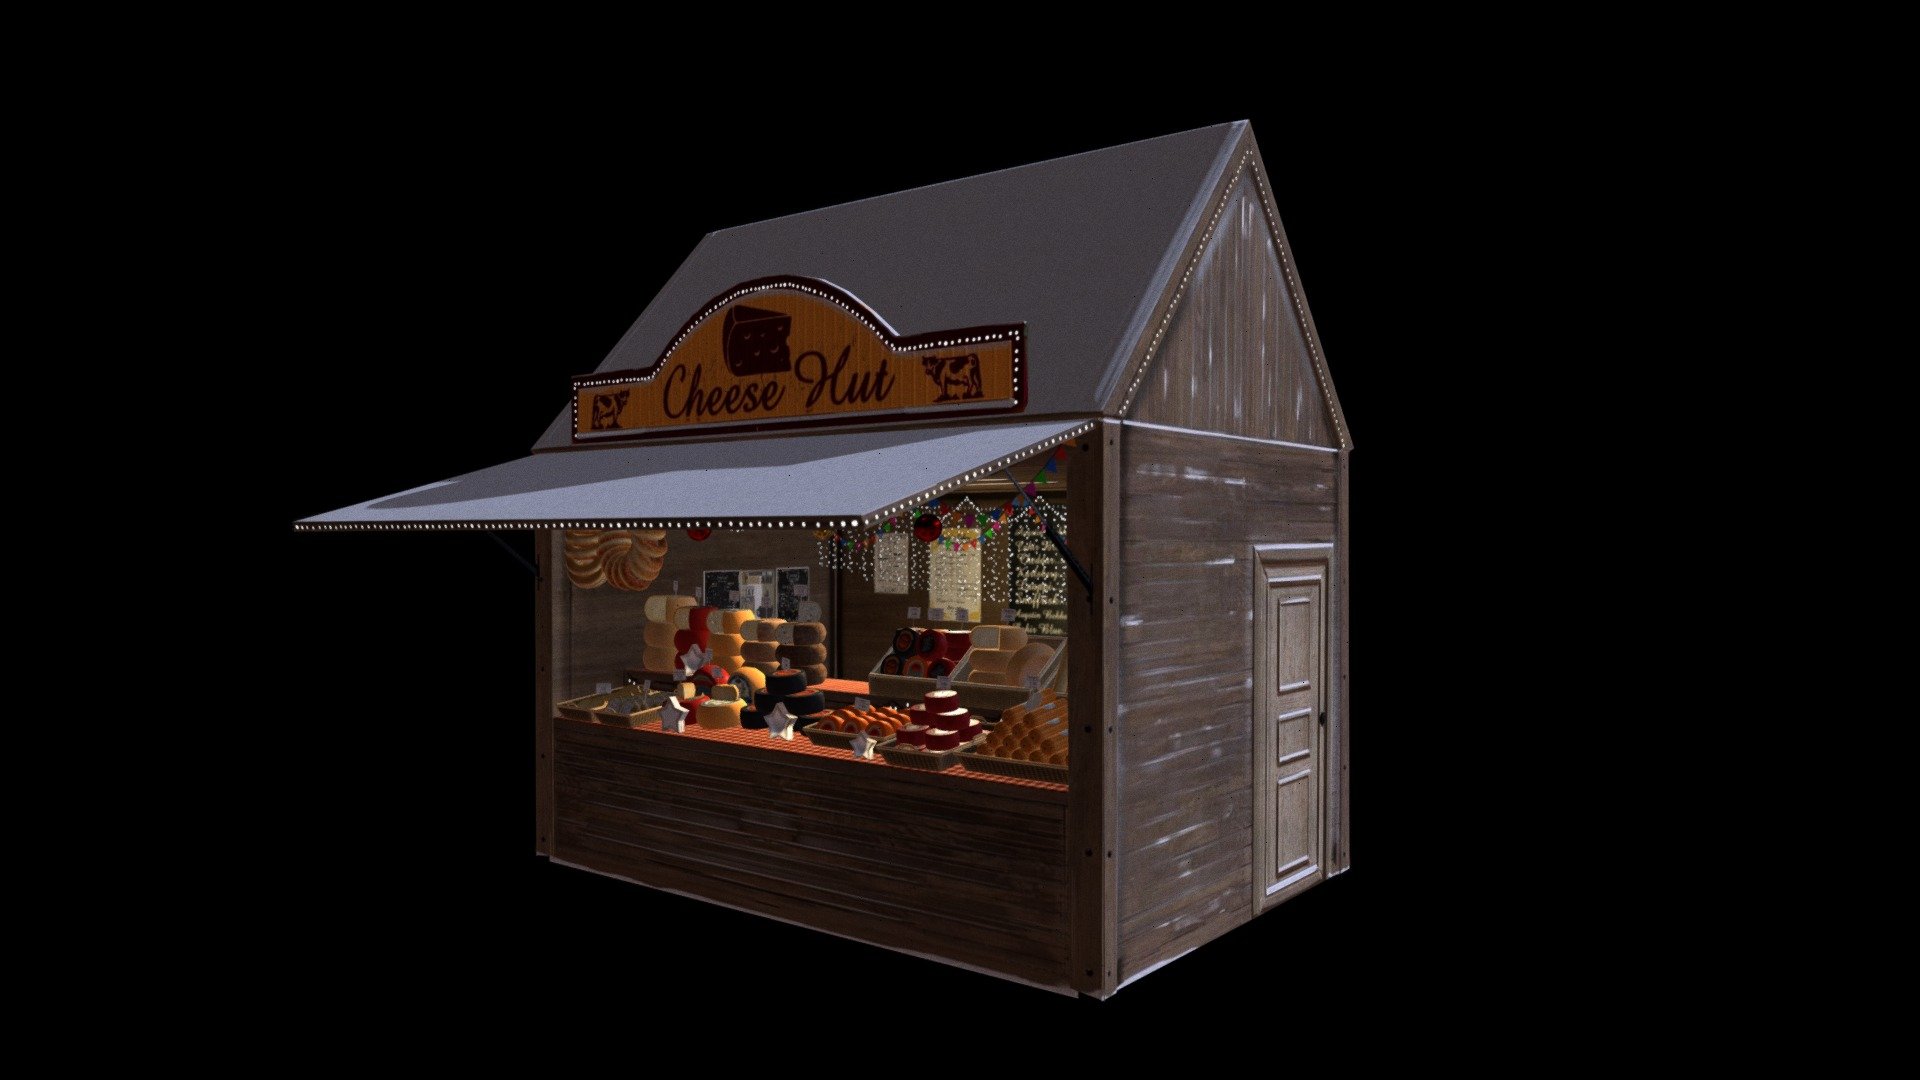 Christmas Market Bakery Chalet- is one of the 6 Chalets of the asset. It is includes over 20 low poly models.Almost all models have Diffuse, Normal, Gloss and Specular maps. Some models as chalet itself and Xmas lights have also Emission maps and transperency maps. All models are made in OBJ, FBX and 3dsMax formats. This models set will suit for Christmas projects and not only.
Demo Video: https://www.youtube.com/watch?v=f-ZwfqrEijE - Christmas Market Cheese Chalet - Buy Royalty Free 3D model by Vaarg 3d model